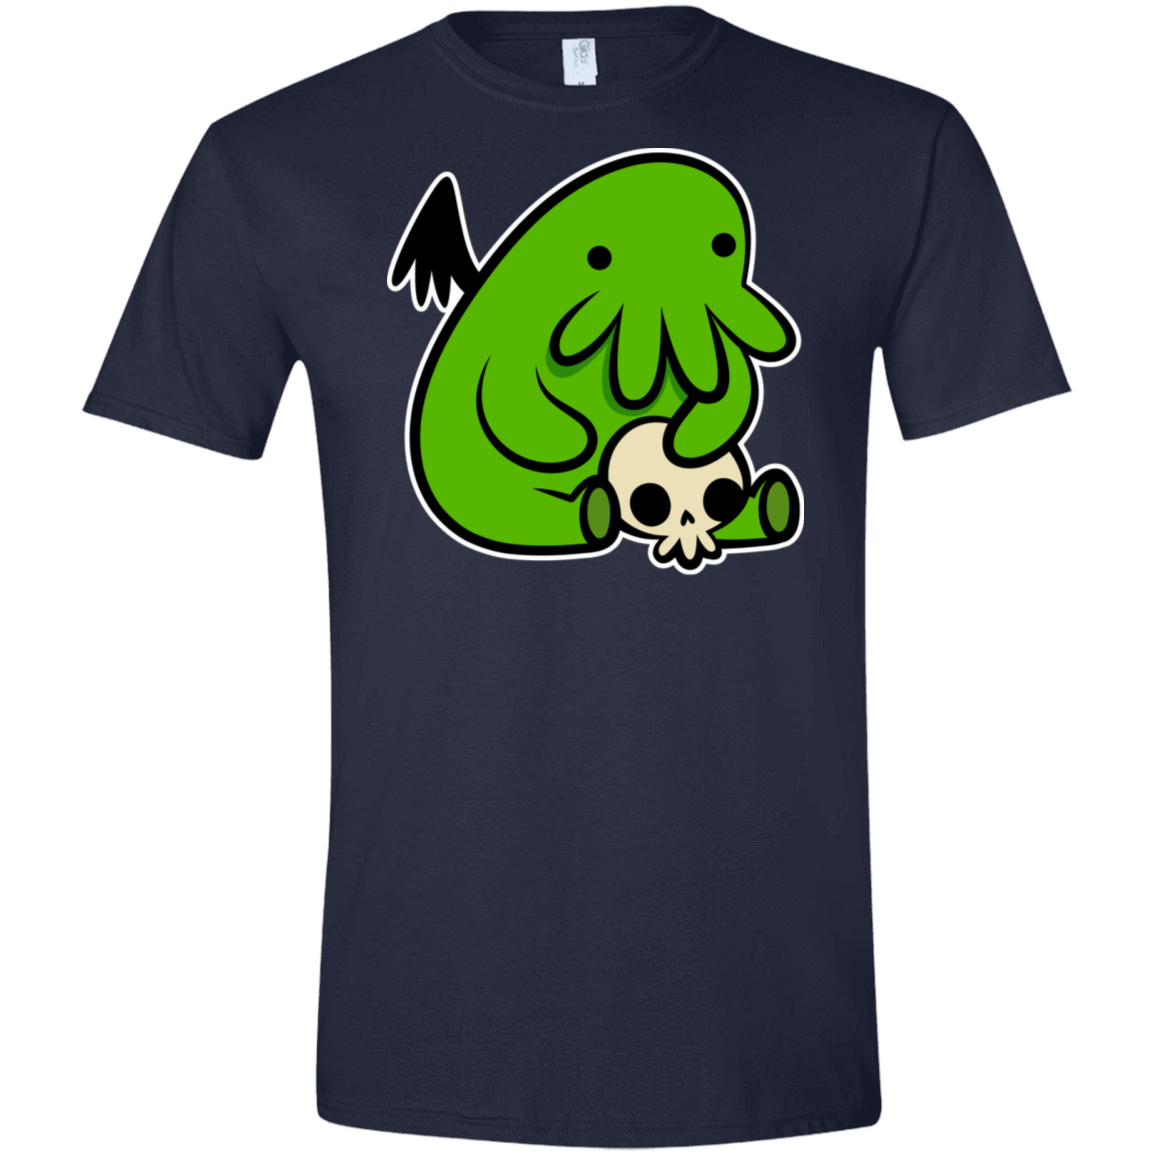 T-Shirts Navy / S Baby Cthulhu Men's Semi-Fitted Softstyle